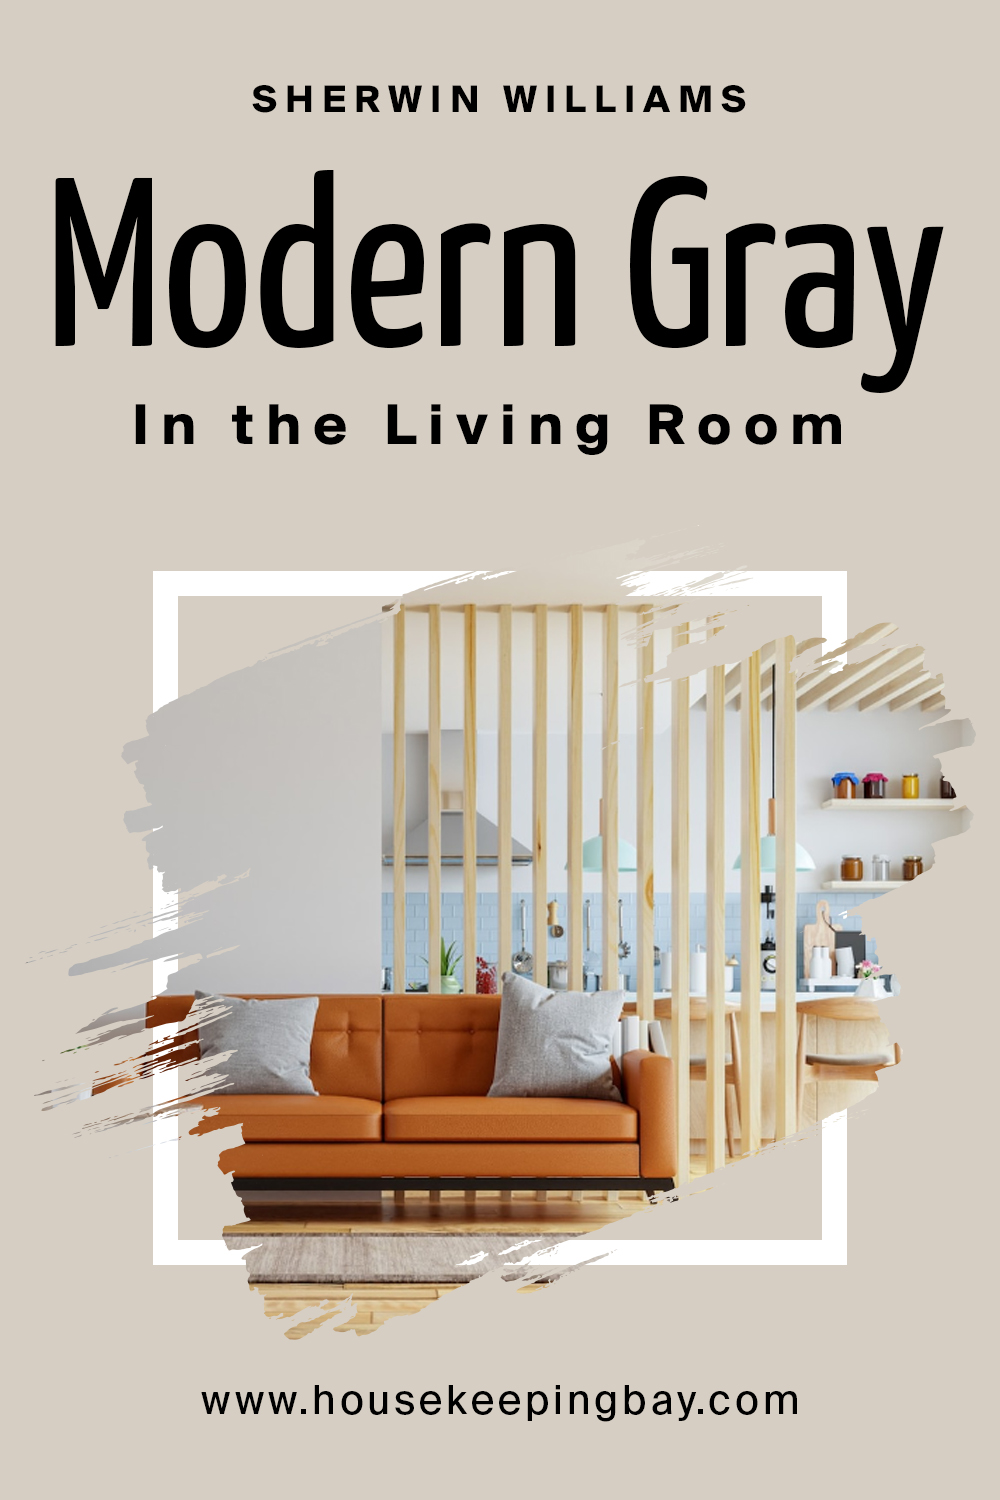 Sherwin Williams. Modern Gray In the Living Room